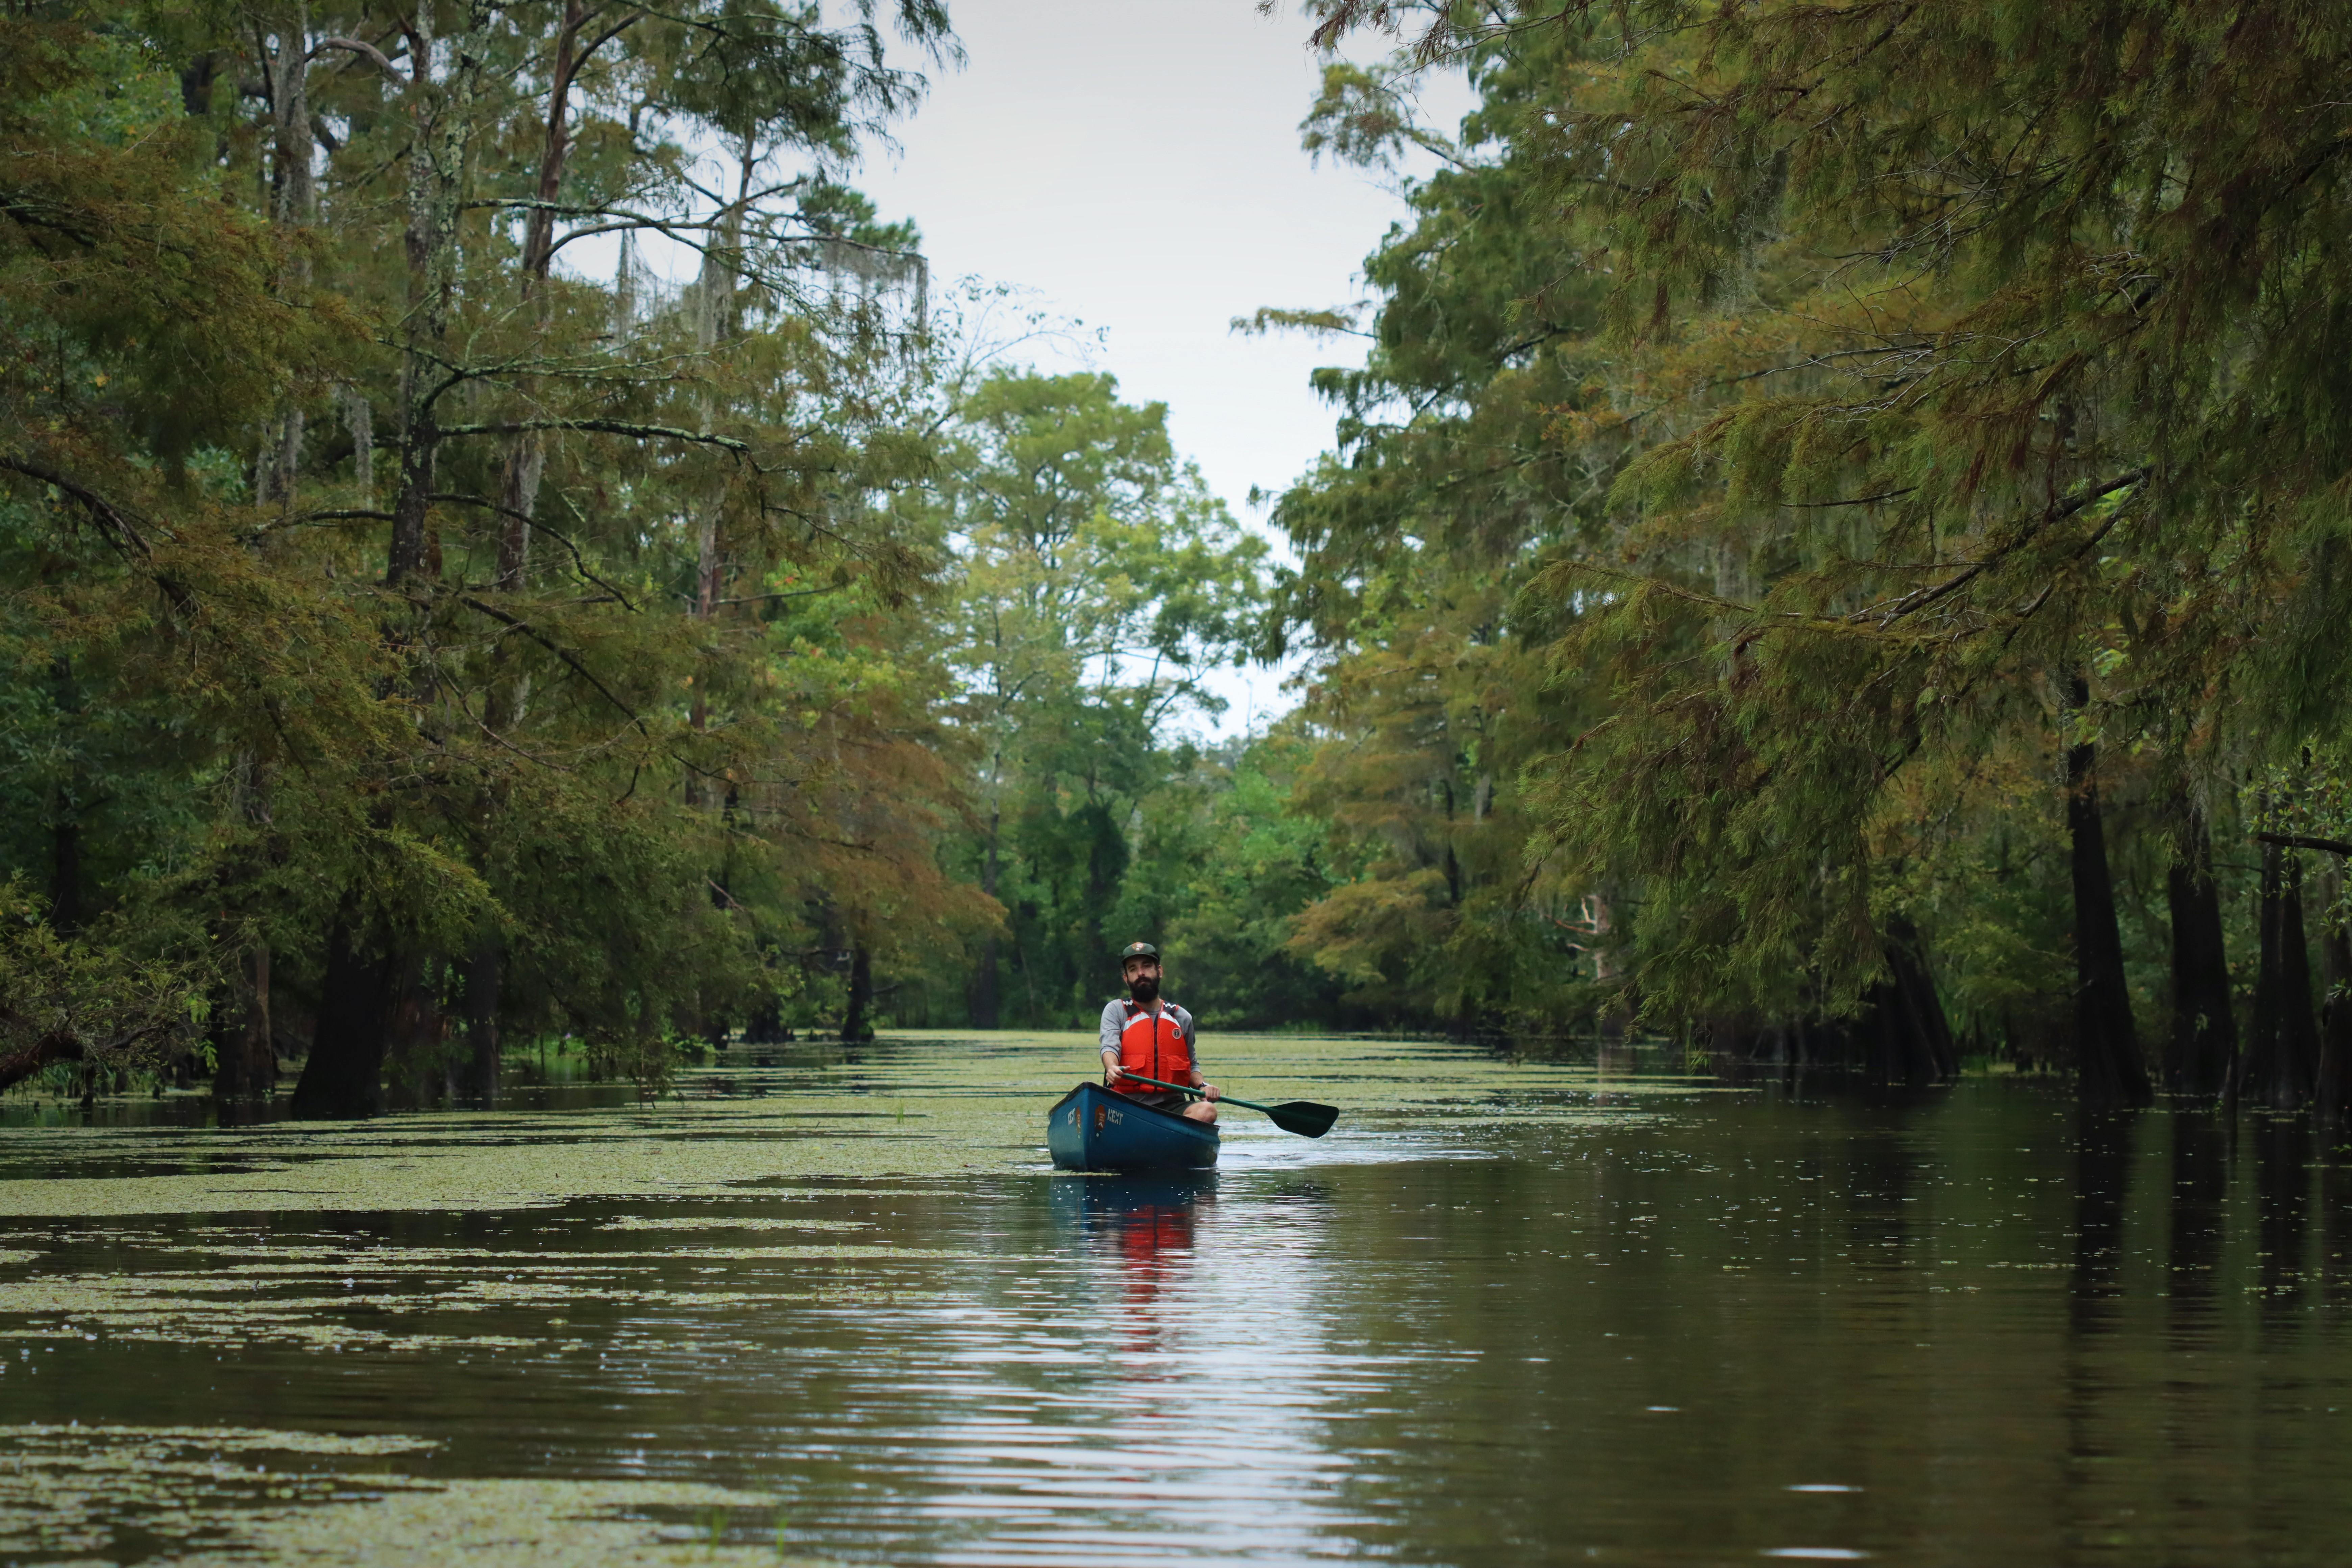 A park ranger paddling a green canoe on a slow-moving waterway below cypress trees.